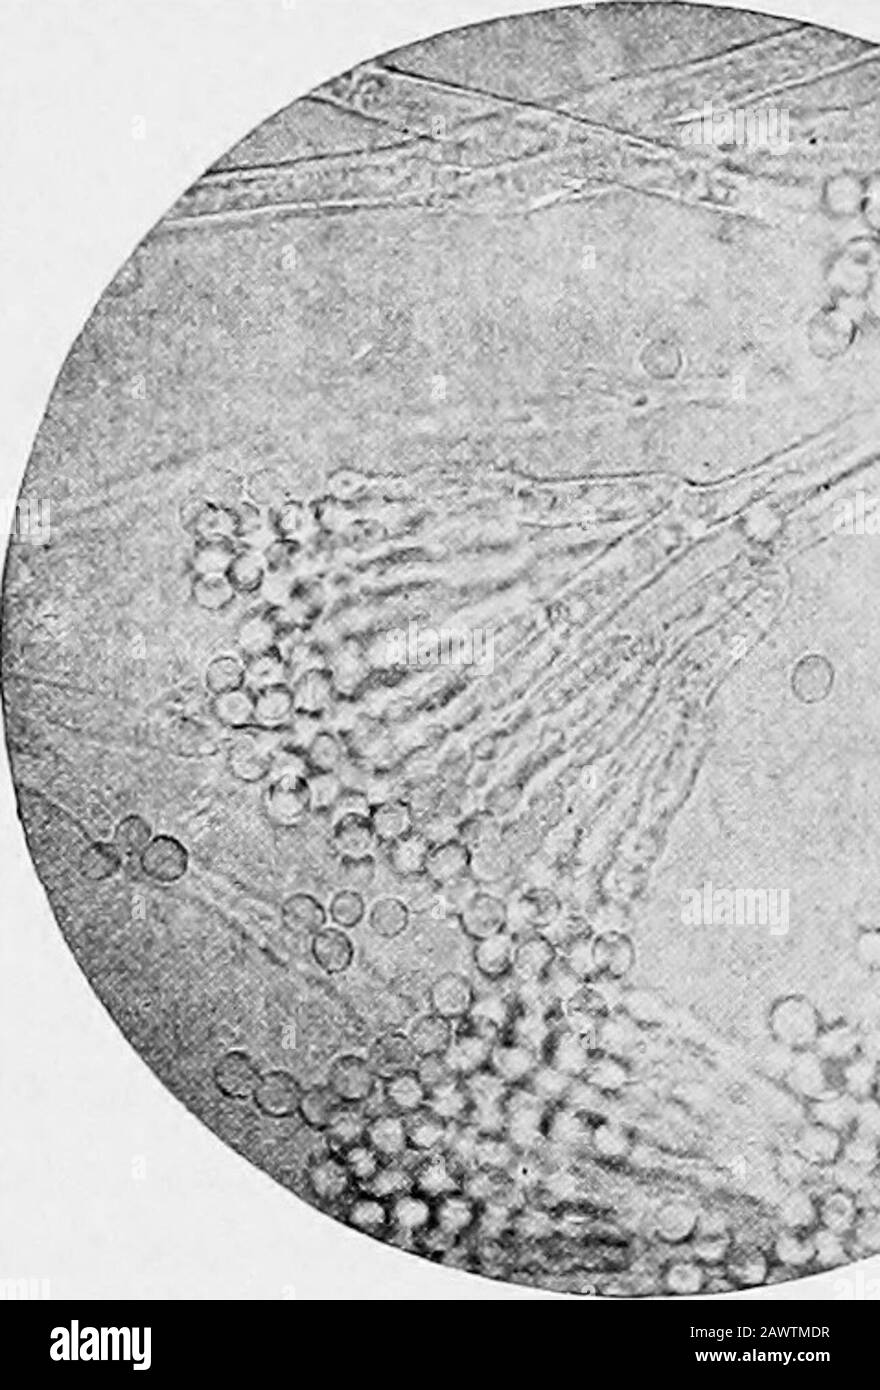 Essentials of bacteriology; being a concise and systematic introduction to the study of bacteria and allied microörganisms . ia g-ndculture-media. Form.—From the mycelium, hyphas spring which divideinto basidia (branches), from which tiny filaments arise(sterigmata), arranged like a brush or tuft. On each sterigmaa little bead or conidium forms, which is the spore. In thisparticular fungus the spores m mass appear green. Growth.—It develops only at ordinary temperatures, form-ing thick, grayish-green molds on bread-mash. At first theseappear white, but as soon as the spores form, the green pr Stock Photo